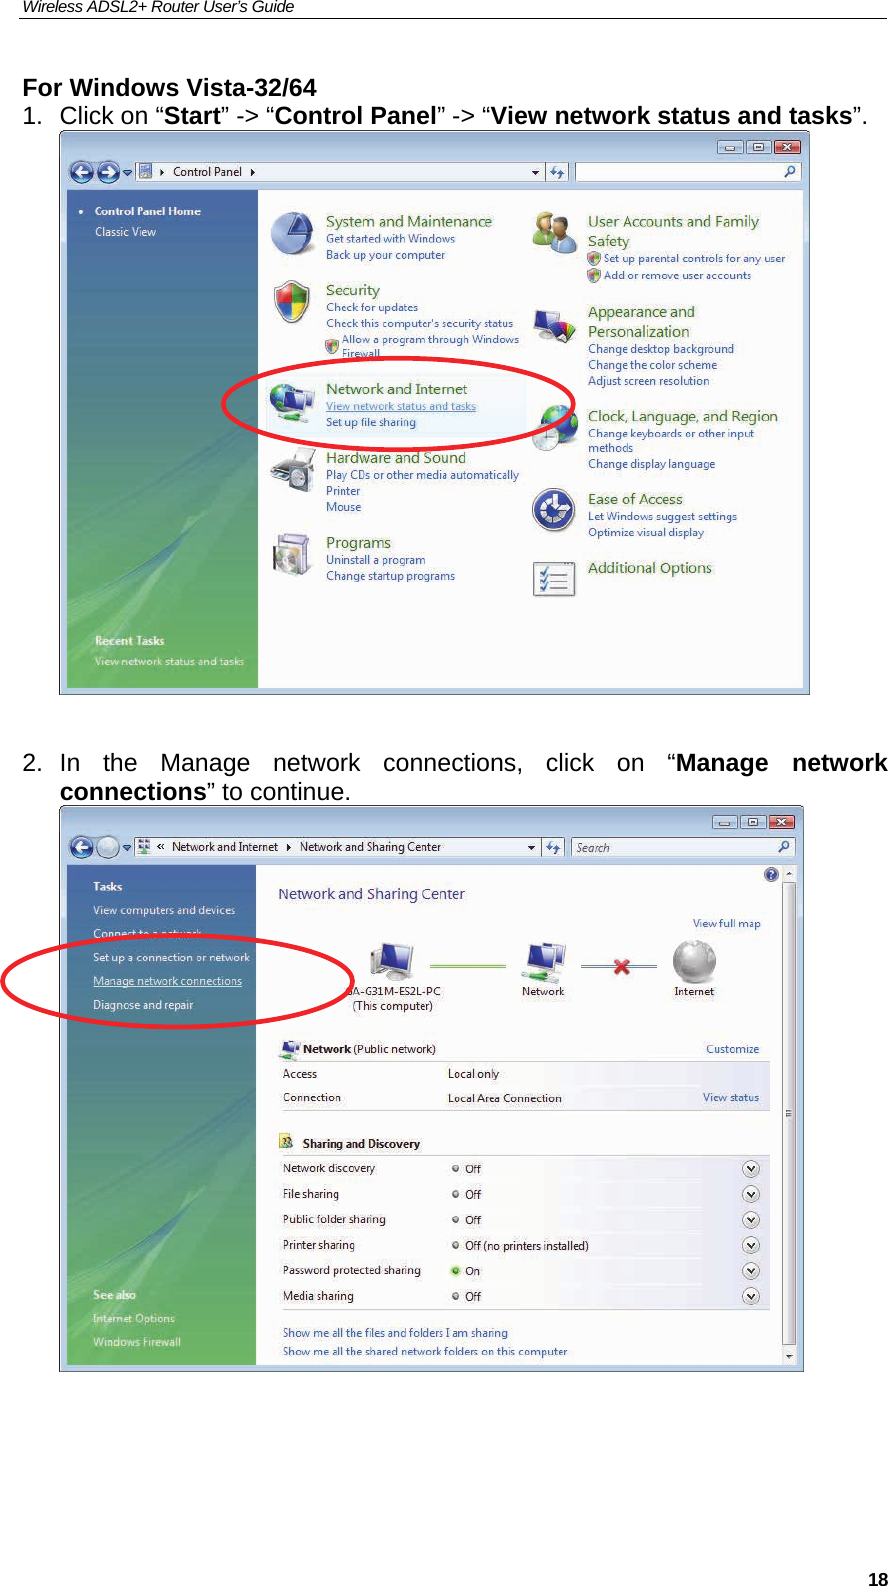 Wireless ADSL2+ Router User’s Guide     18For Windows Vista-32/64 1.  Click on “Start” -&gt; “Control Panel” -&gt; “View network status and tasks”.   2. In the Manage network connections, click on “Manage network connections” to continue.     